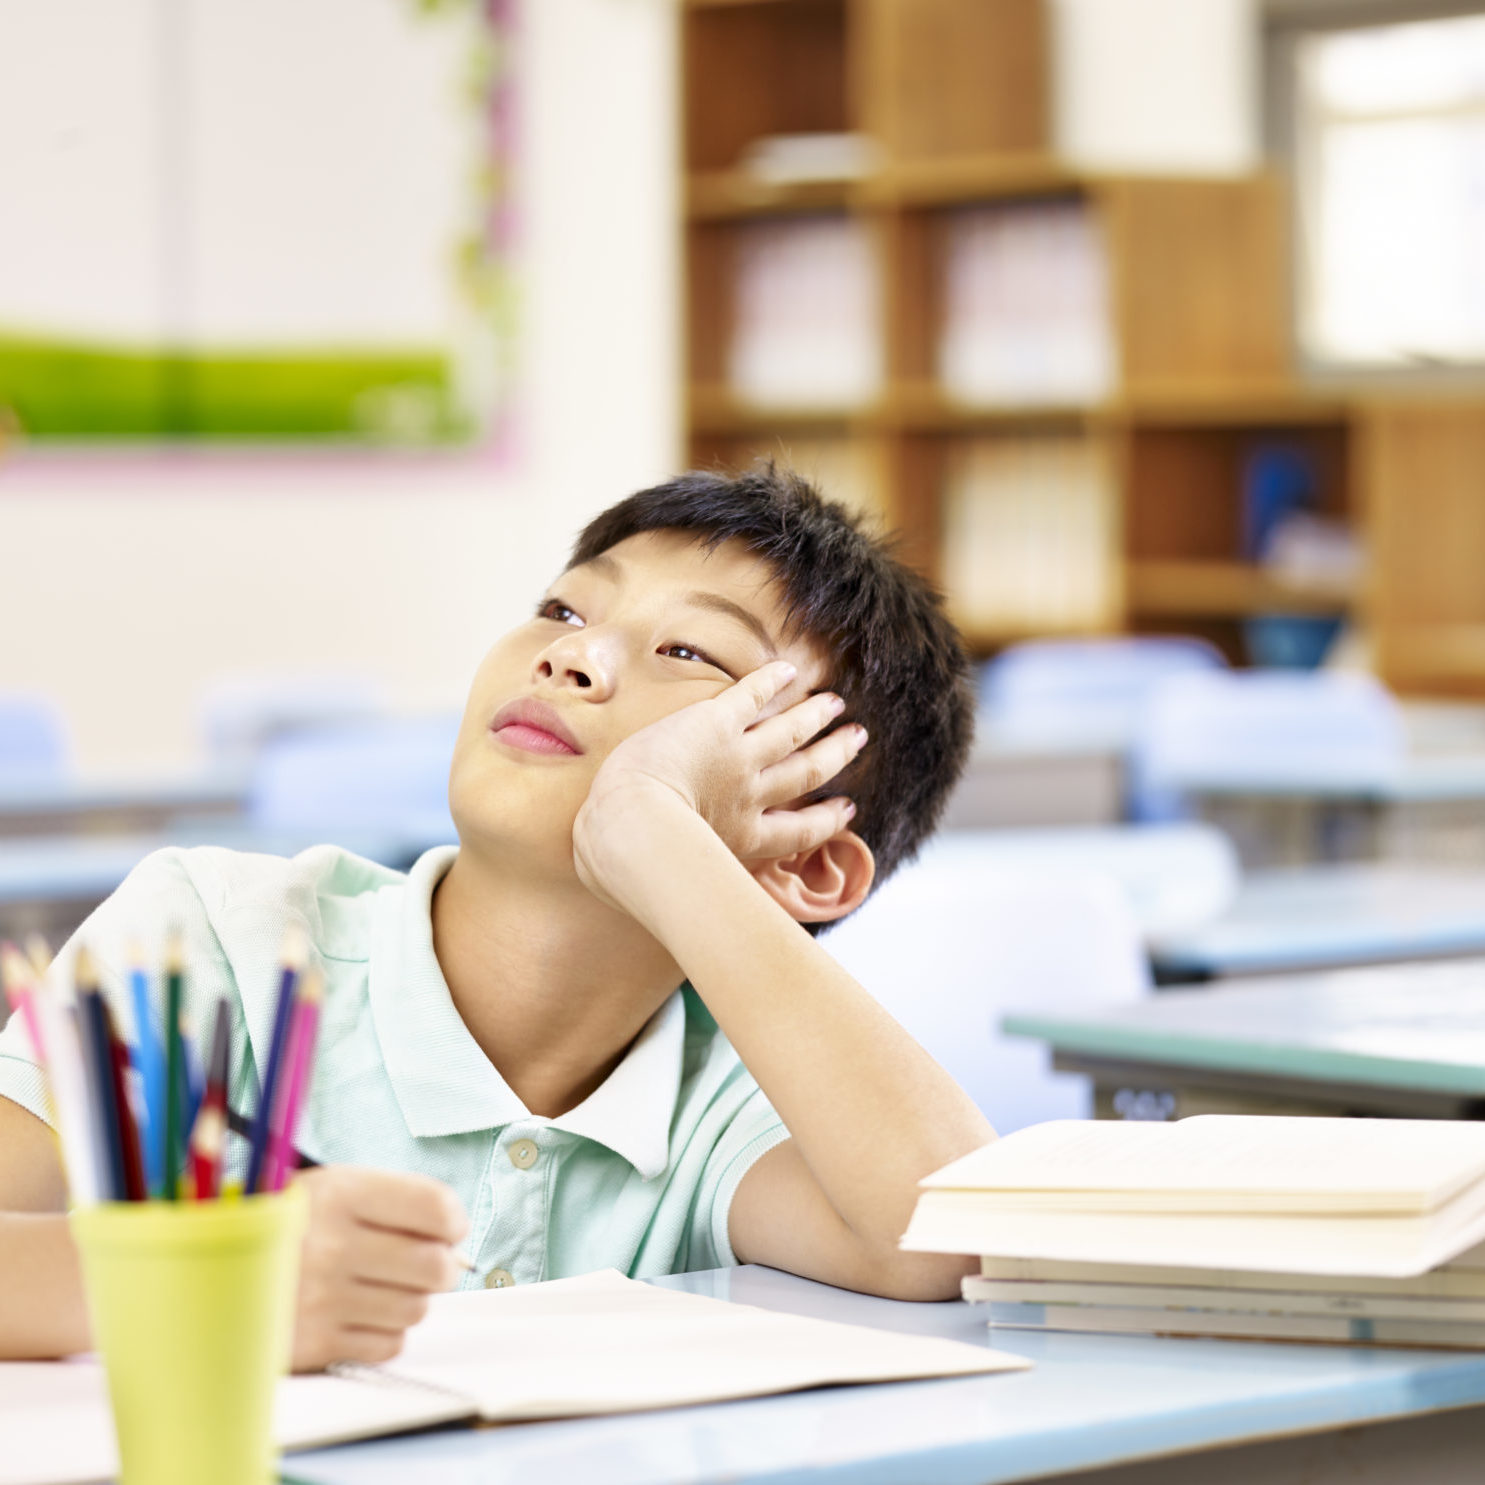 young student not focusing in class due to attention deficit hyperactivity disorder